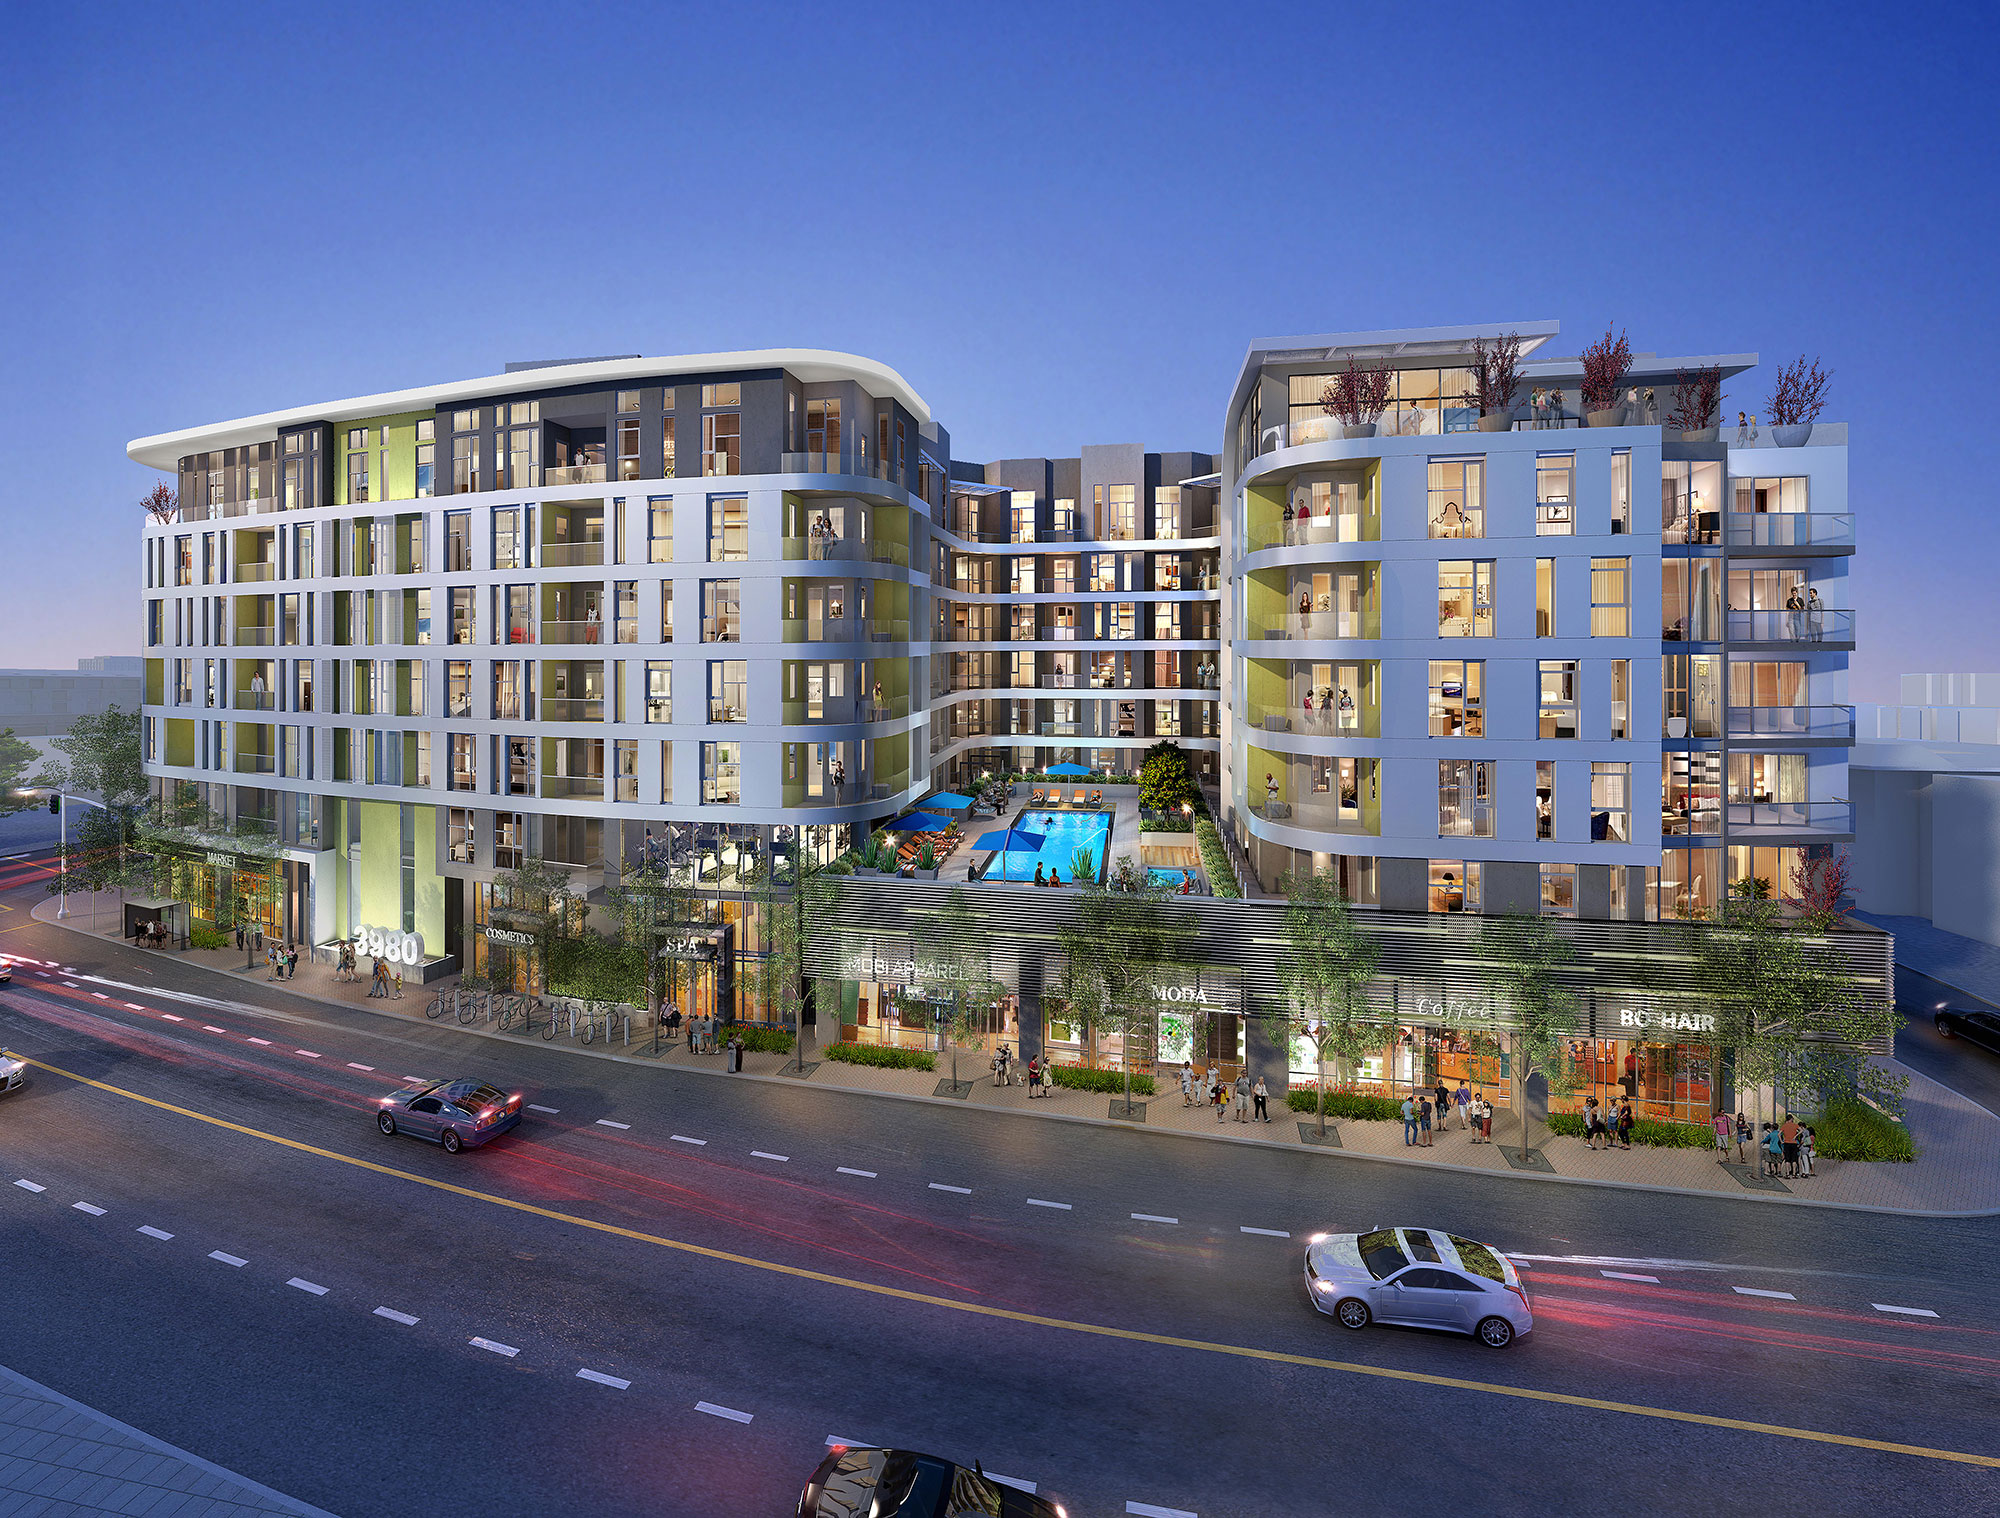 3980 Wilshire Boulevard | Mixed-Use Podium Apartments | Retail | Los Angeles, California | KTGY Architecture + Planning